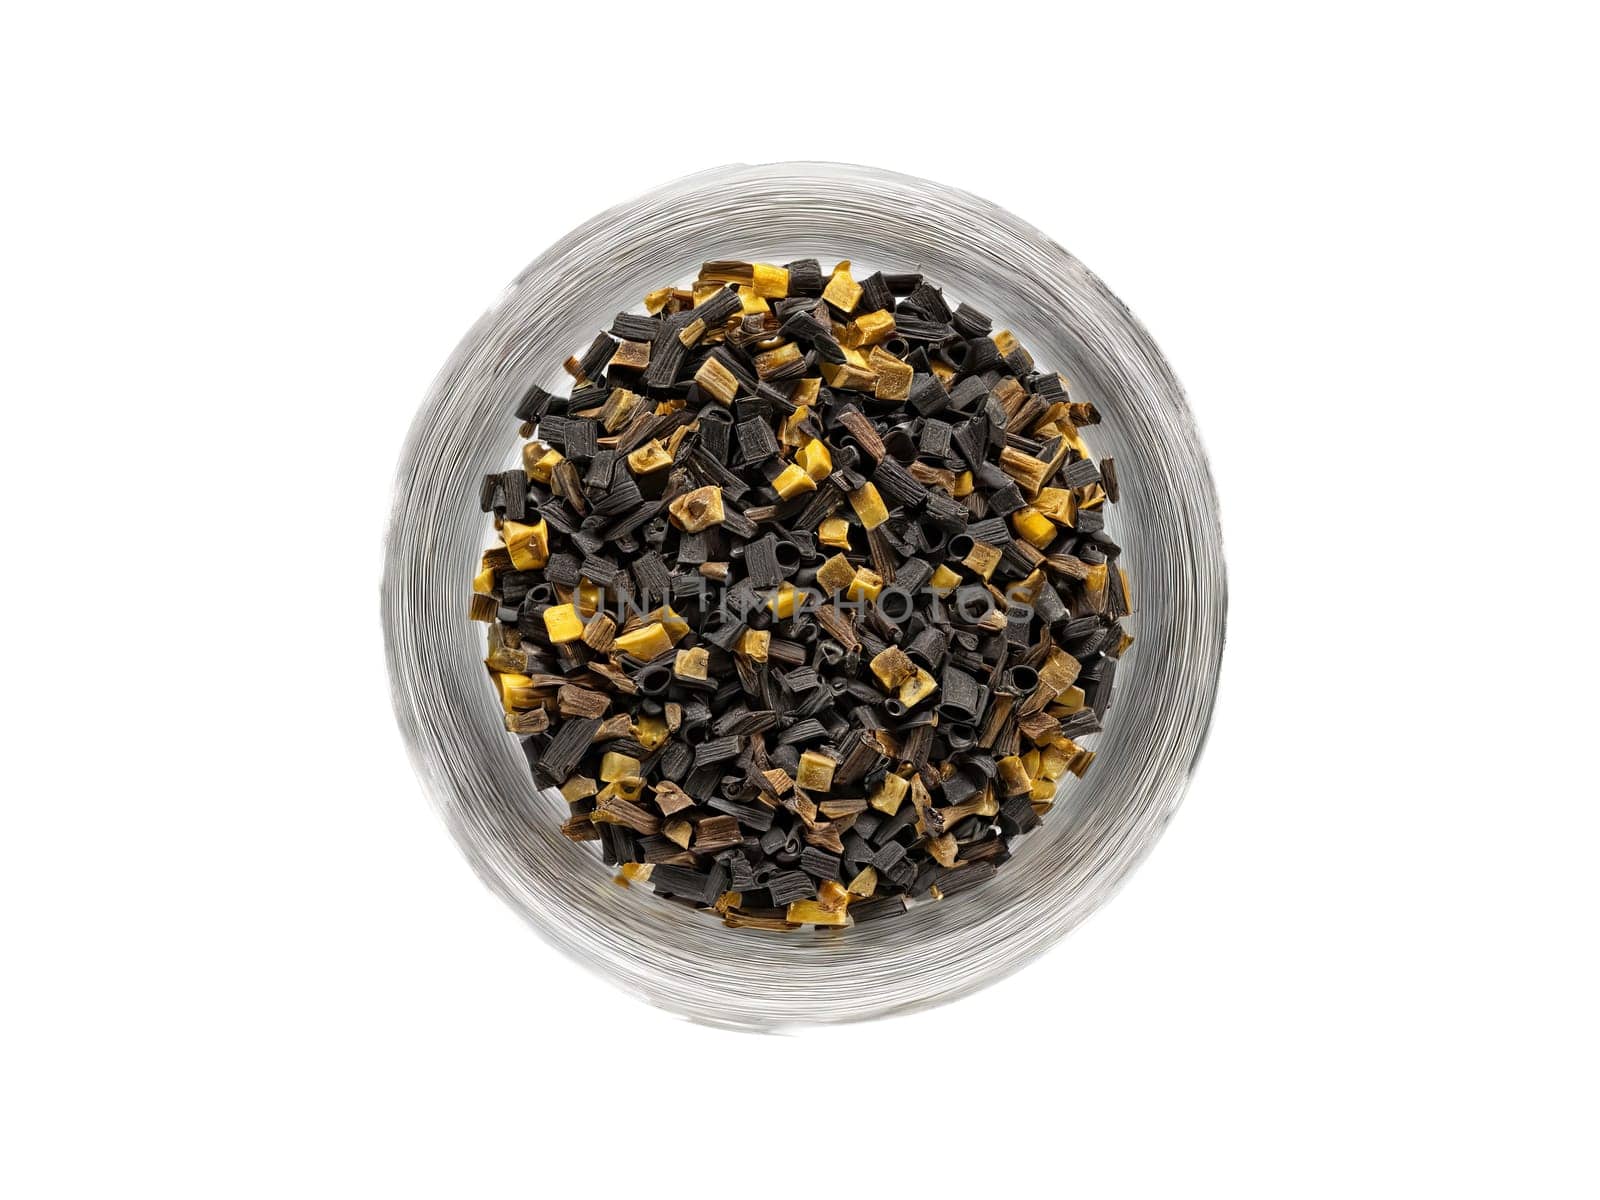 Licorice Tea Sweet licorice tea in a transparent glass with licorice root pieces and. Drink isolated on transparent background.